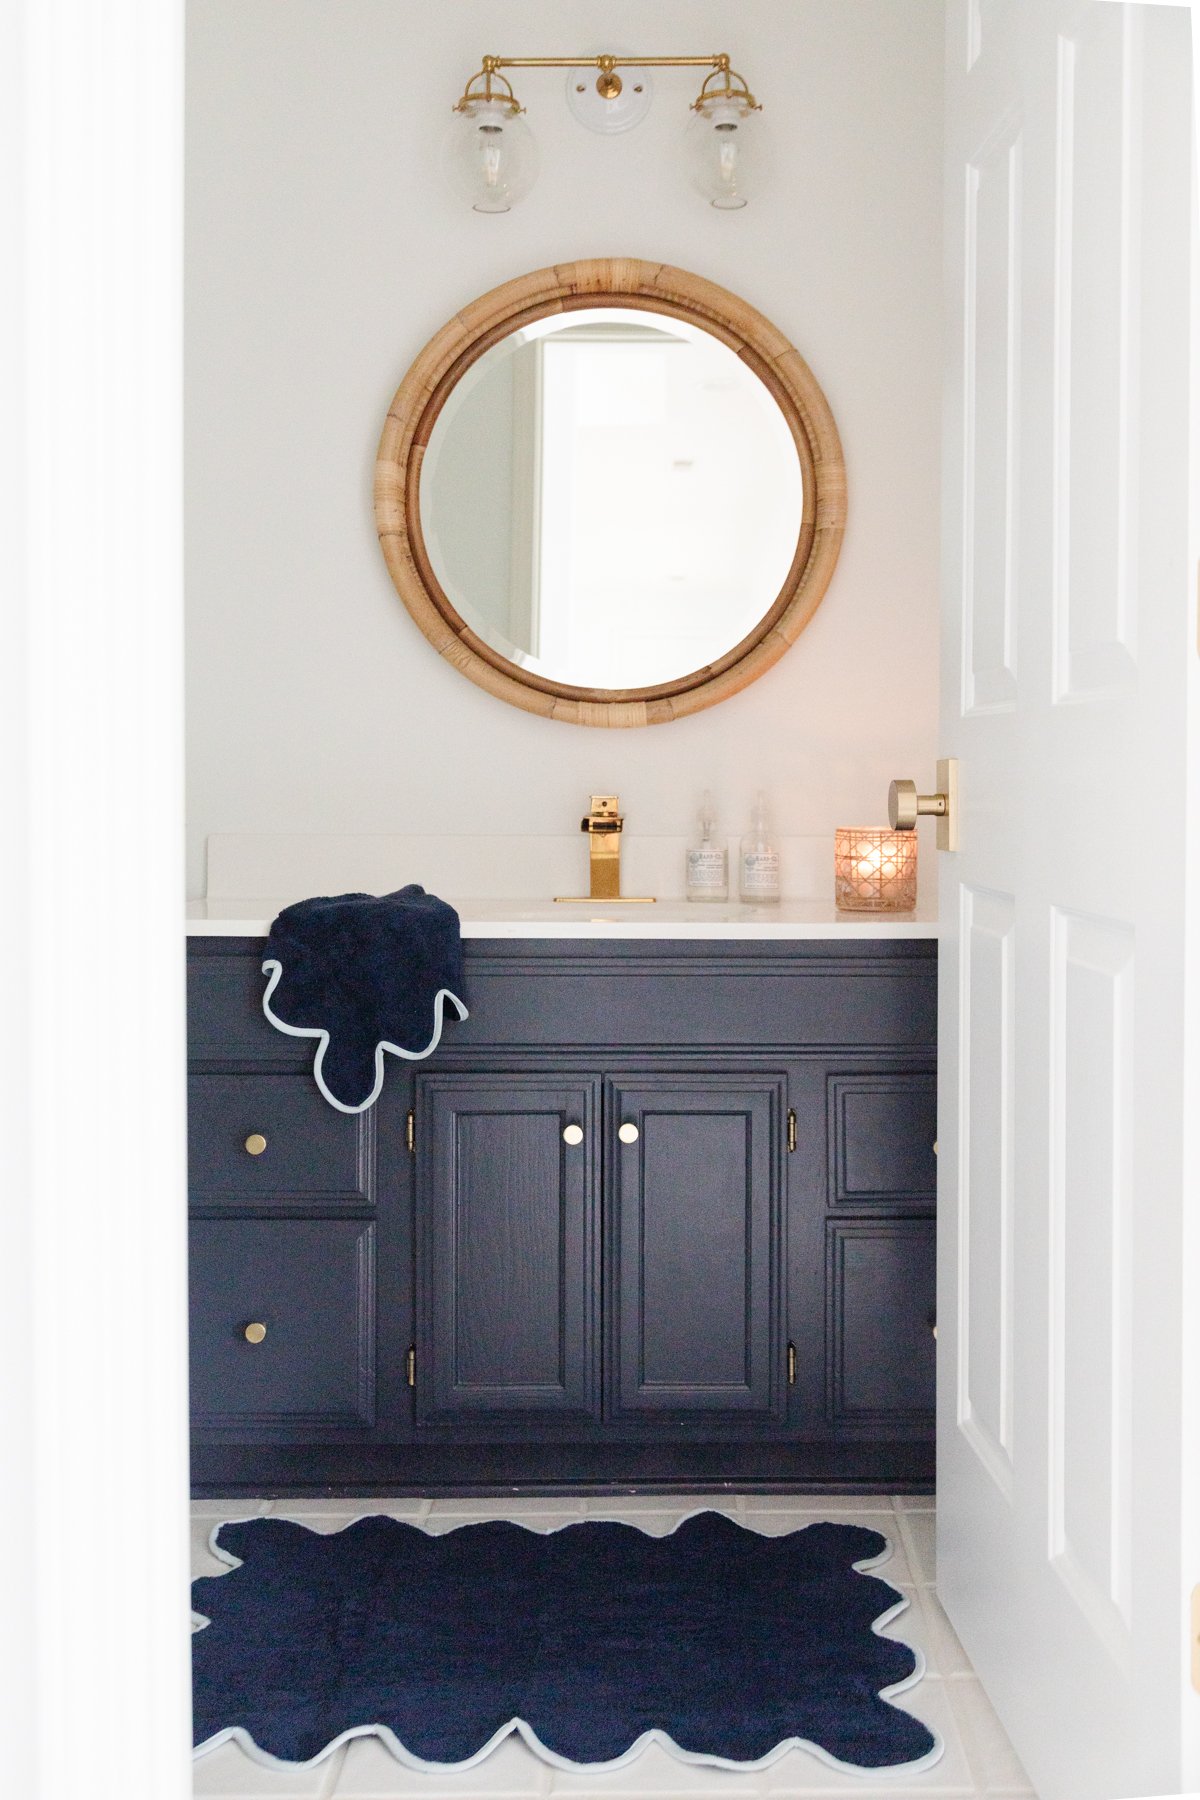 A nautical bathroom decor with navy cabinets and a gold mirror.